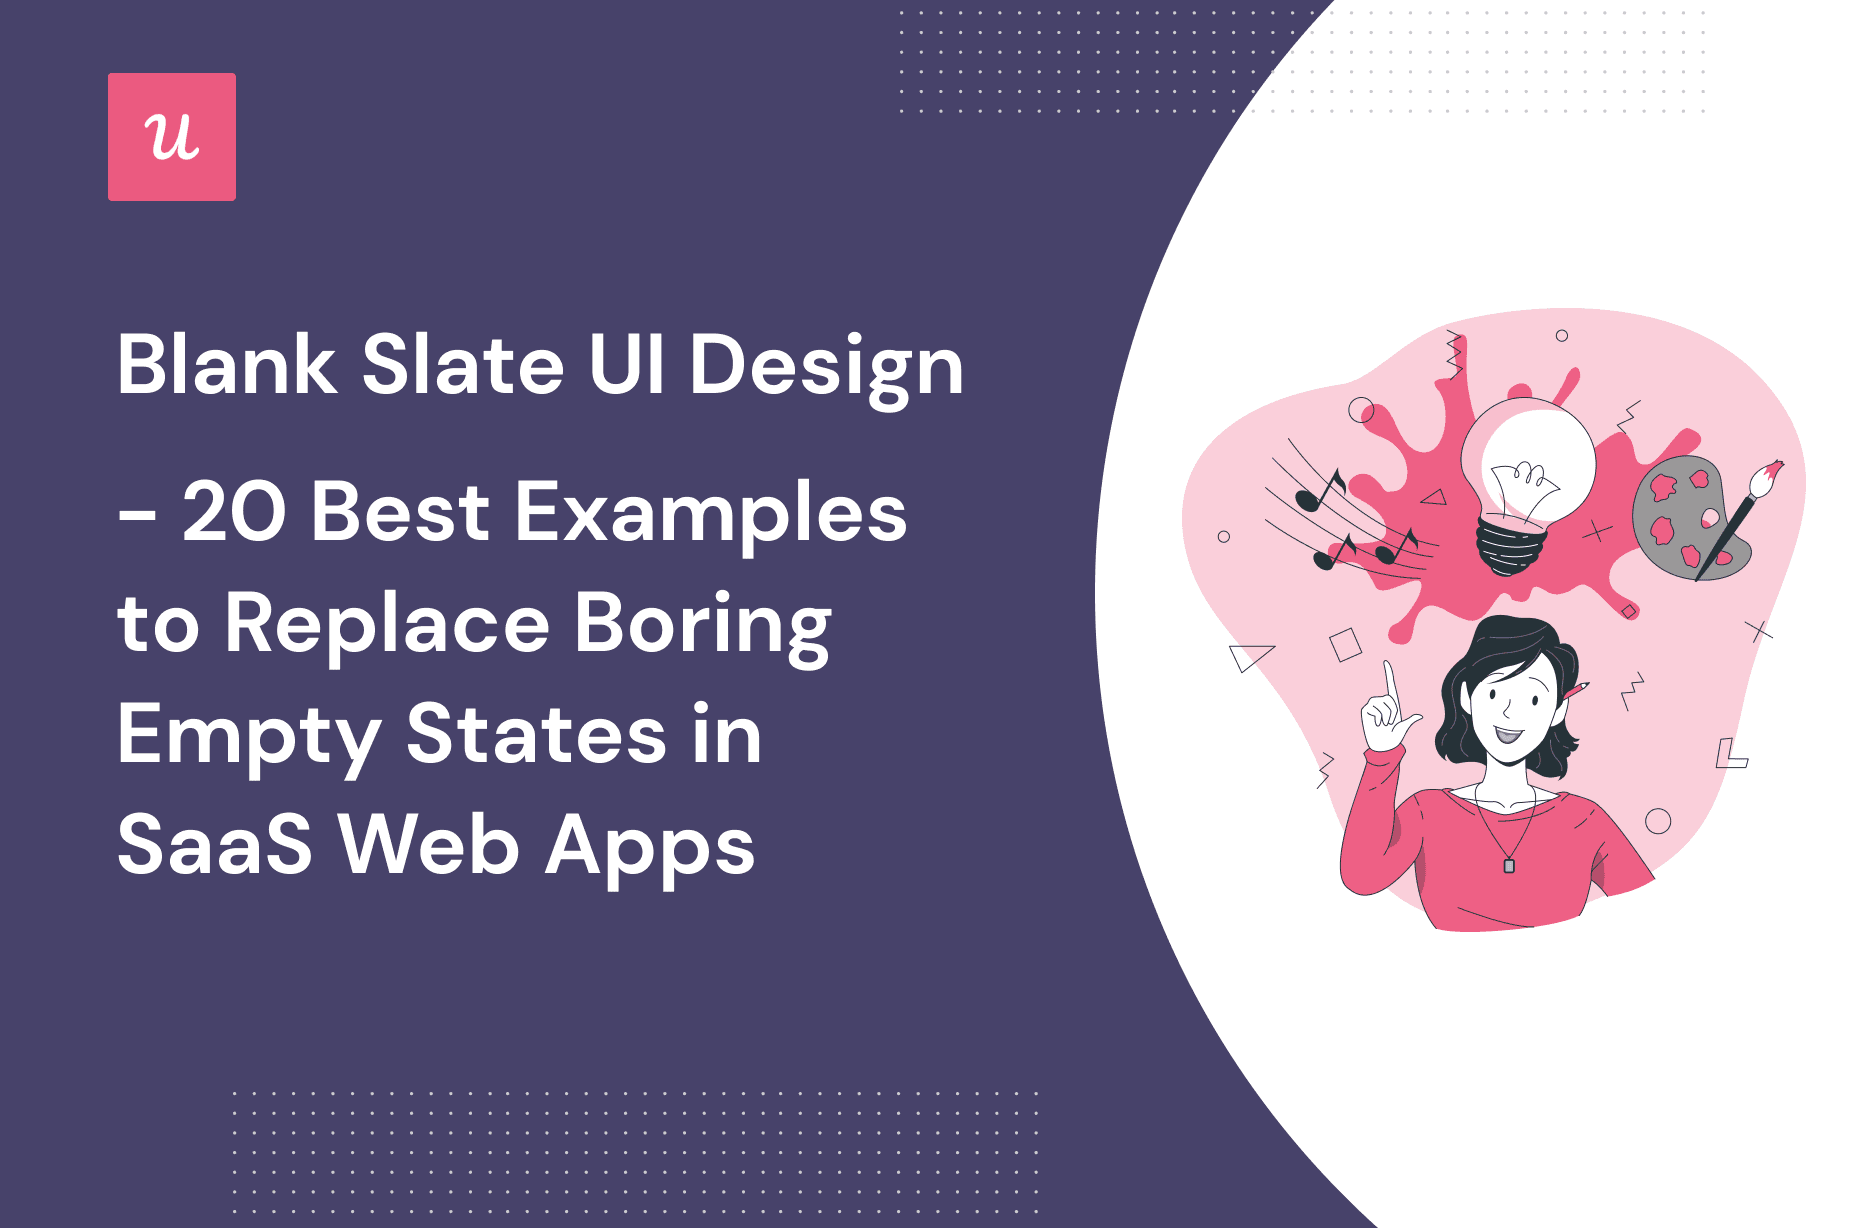 Blank Slate UI Design- 20 Best Examples to Replace Boring Empty States in SaaS Webapps